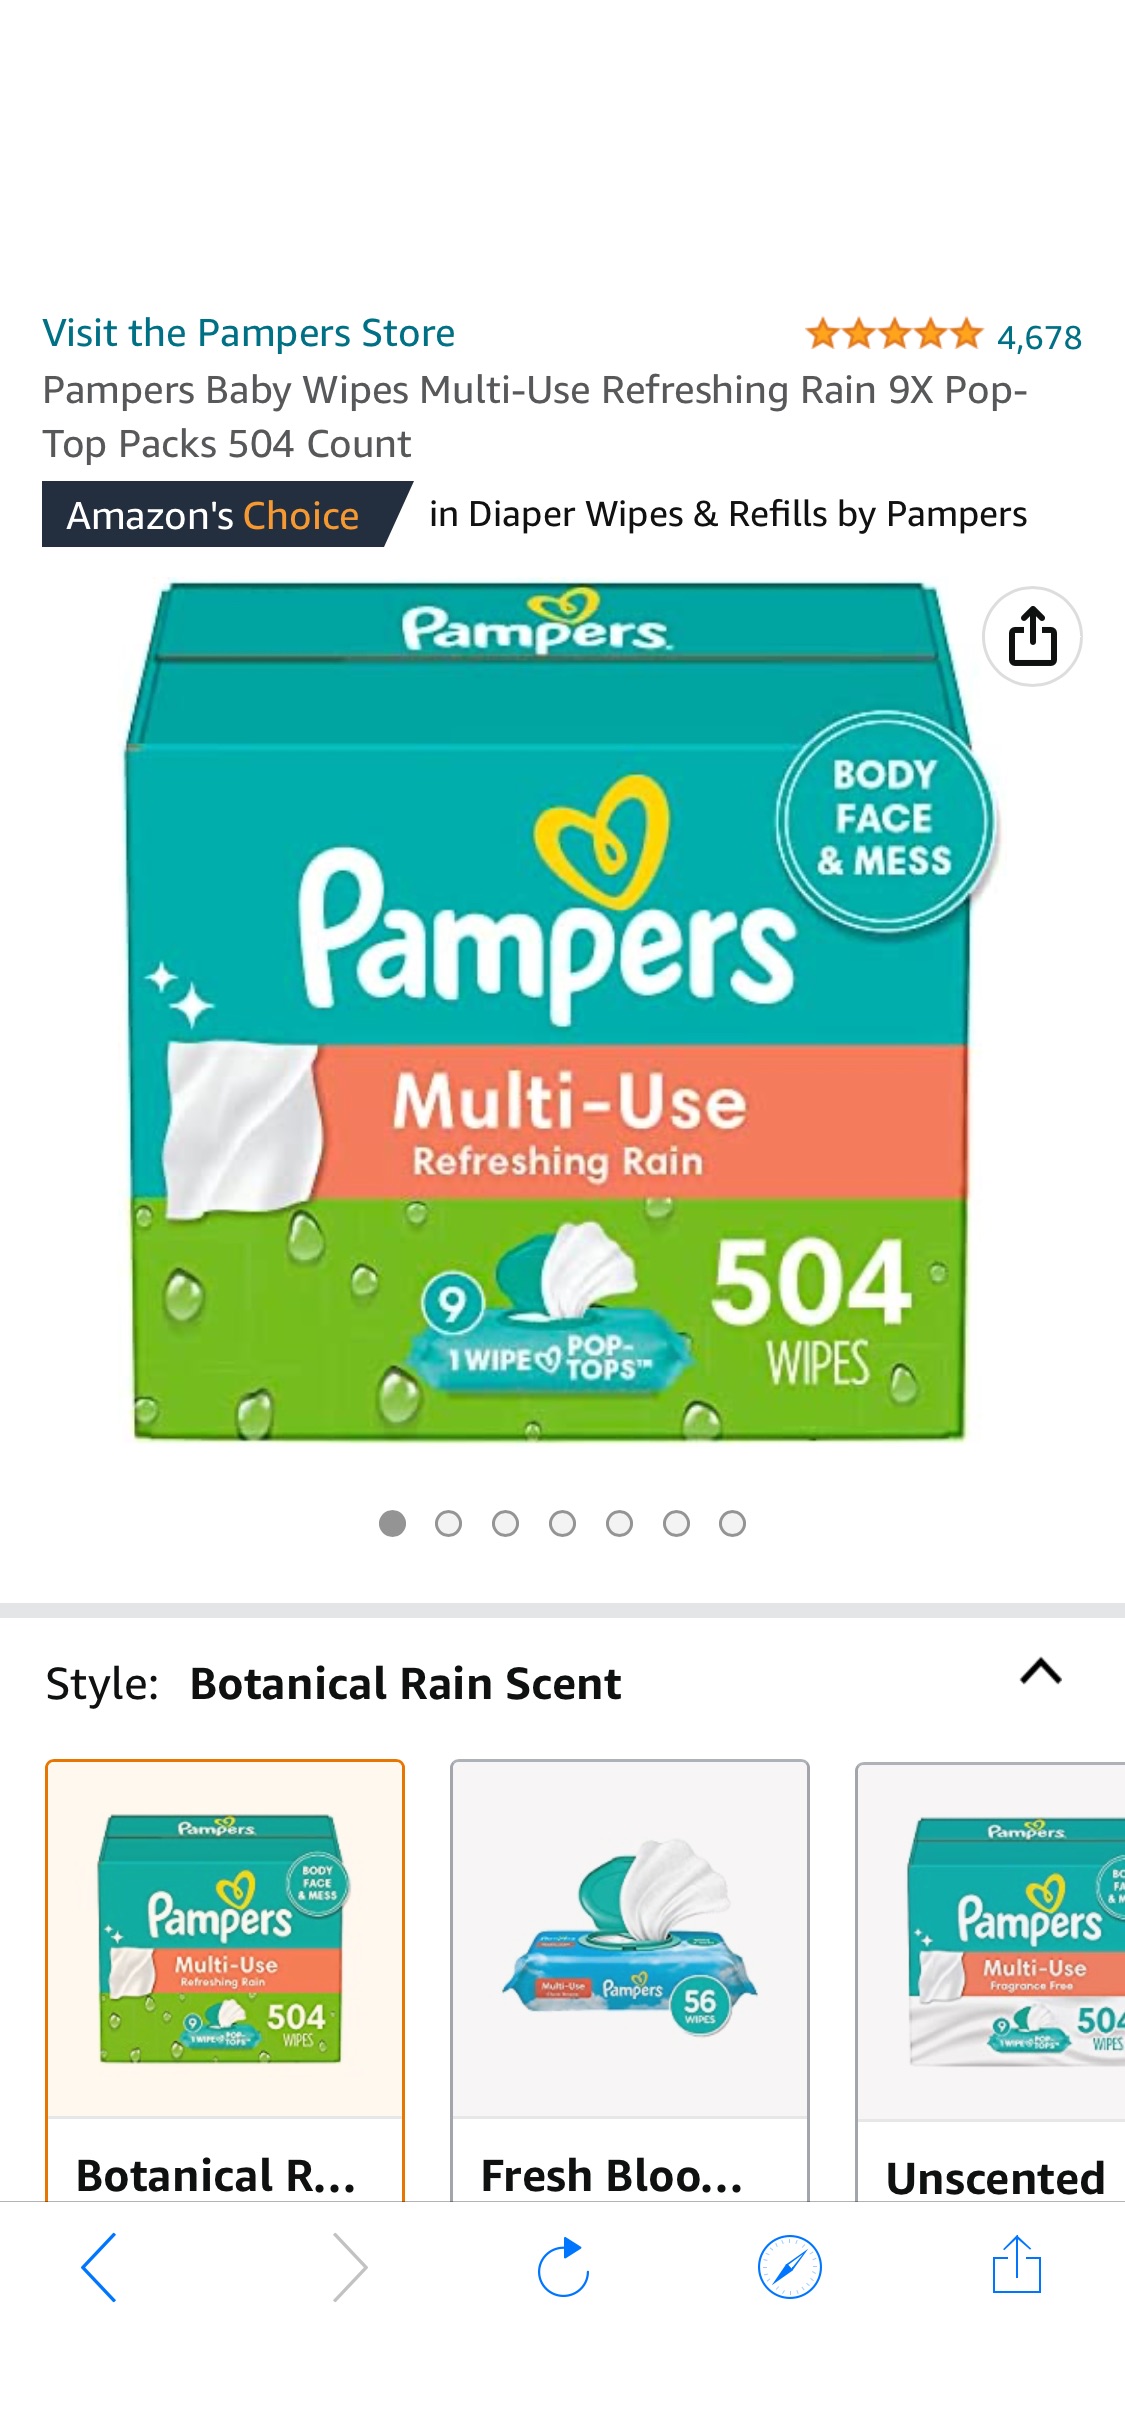 Amazon.com: Pampers Baby Wipes Multi-Use Refreshing Rain 9X Pop-Top Packs 504 Count :多用湿巾